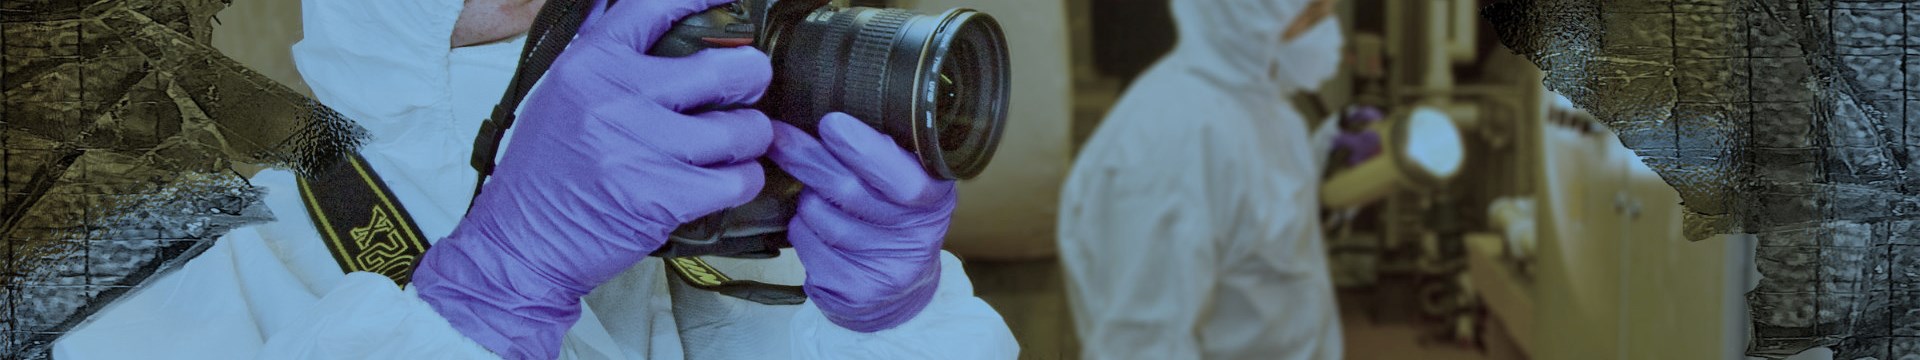 man in ppe taking a photo at a forensics scene